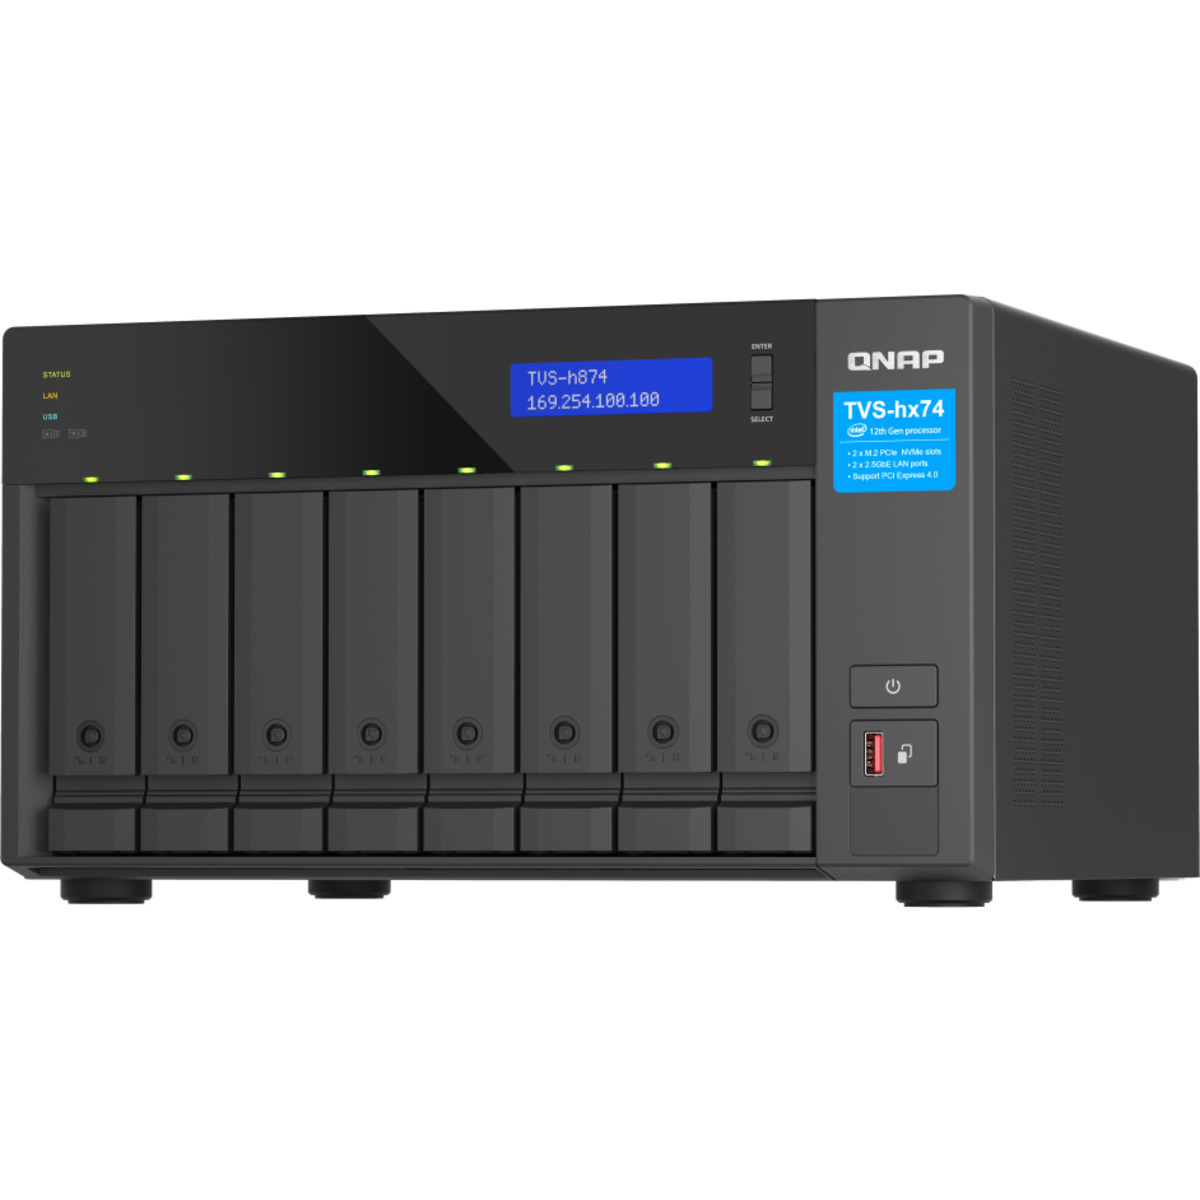 QNAP TVS-h874 Core i7 126tb 8-Bay Desktop Multimedia / Power User / Business NAS - Network Attached Storage Device 7x18tb Western Digital Ultrastar DC HC550 WUH721818ALE6L4 3.5 7200rpm SATA 6Gb/s HDD ENTERPRISE Class Drives Installed - Burn-In Tested TVS-h874 Core i7